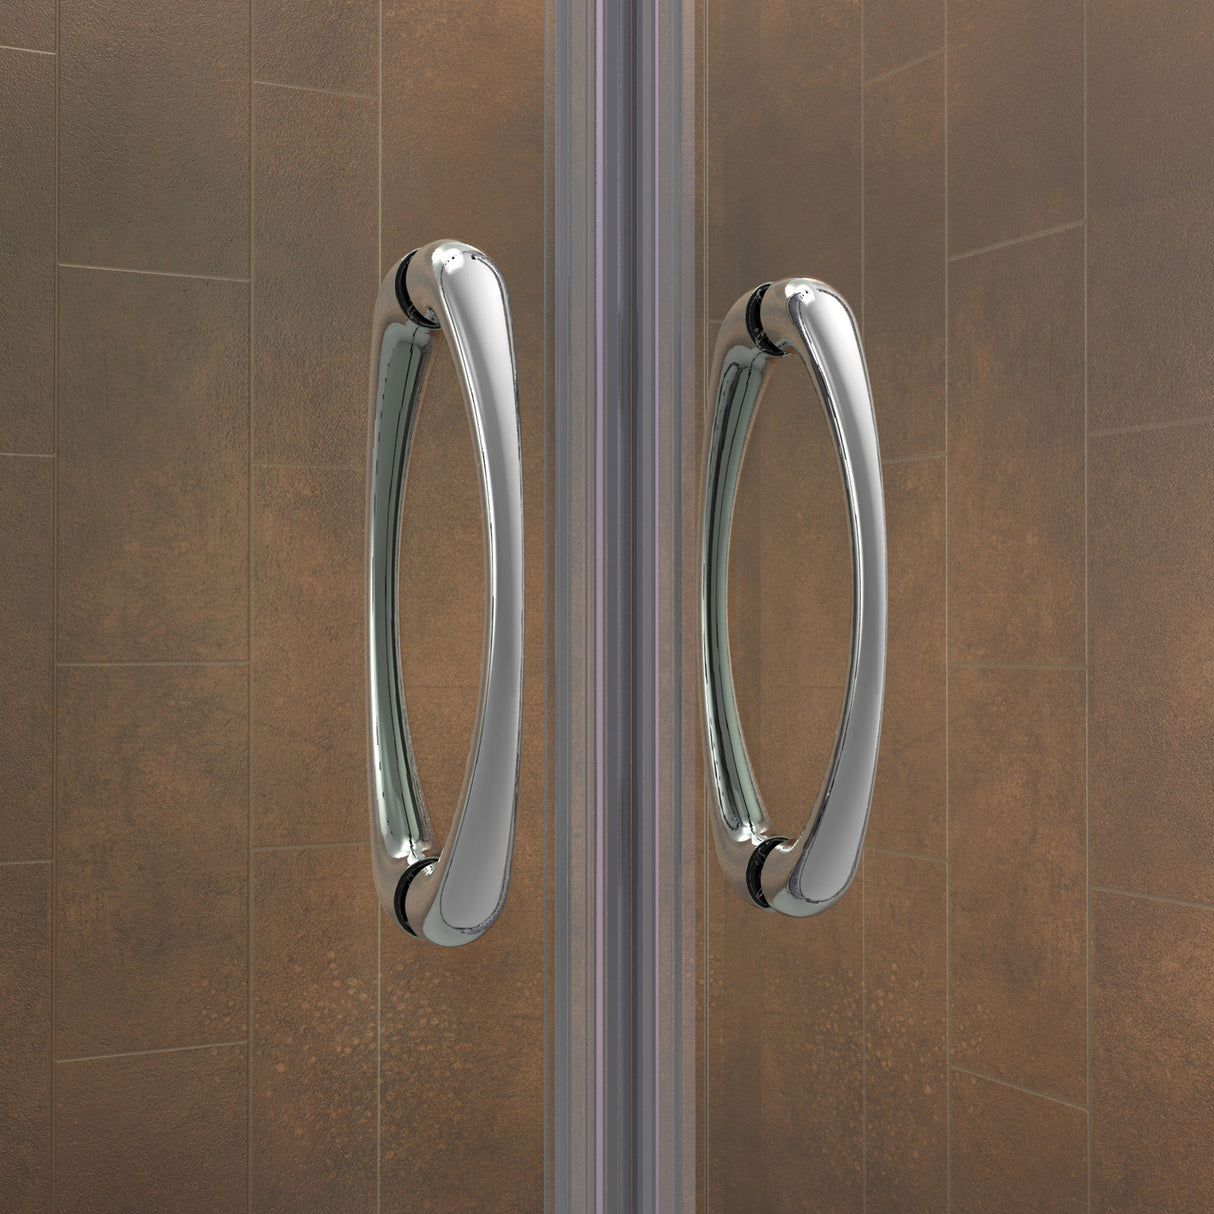 DreamLine Visions 34 in. D x 60 in. W x 74 3/4 in. H Sliding Shower Door in Chrome with Center Drain Biscuit Shower Base